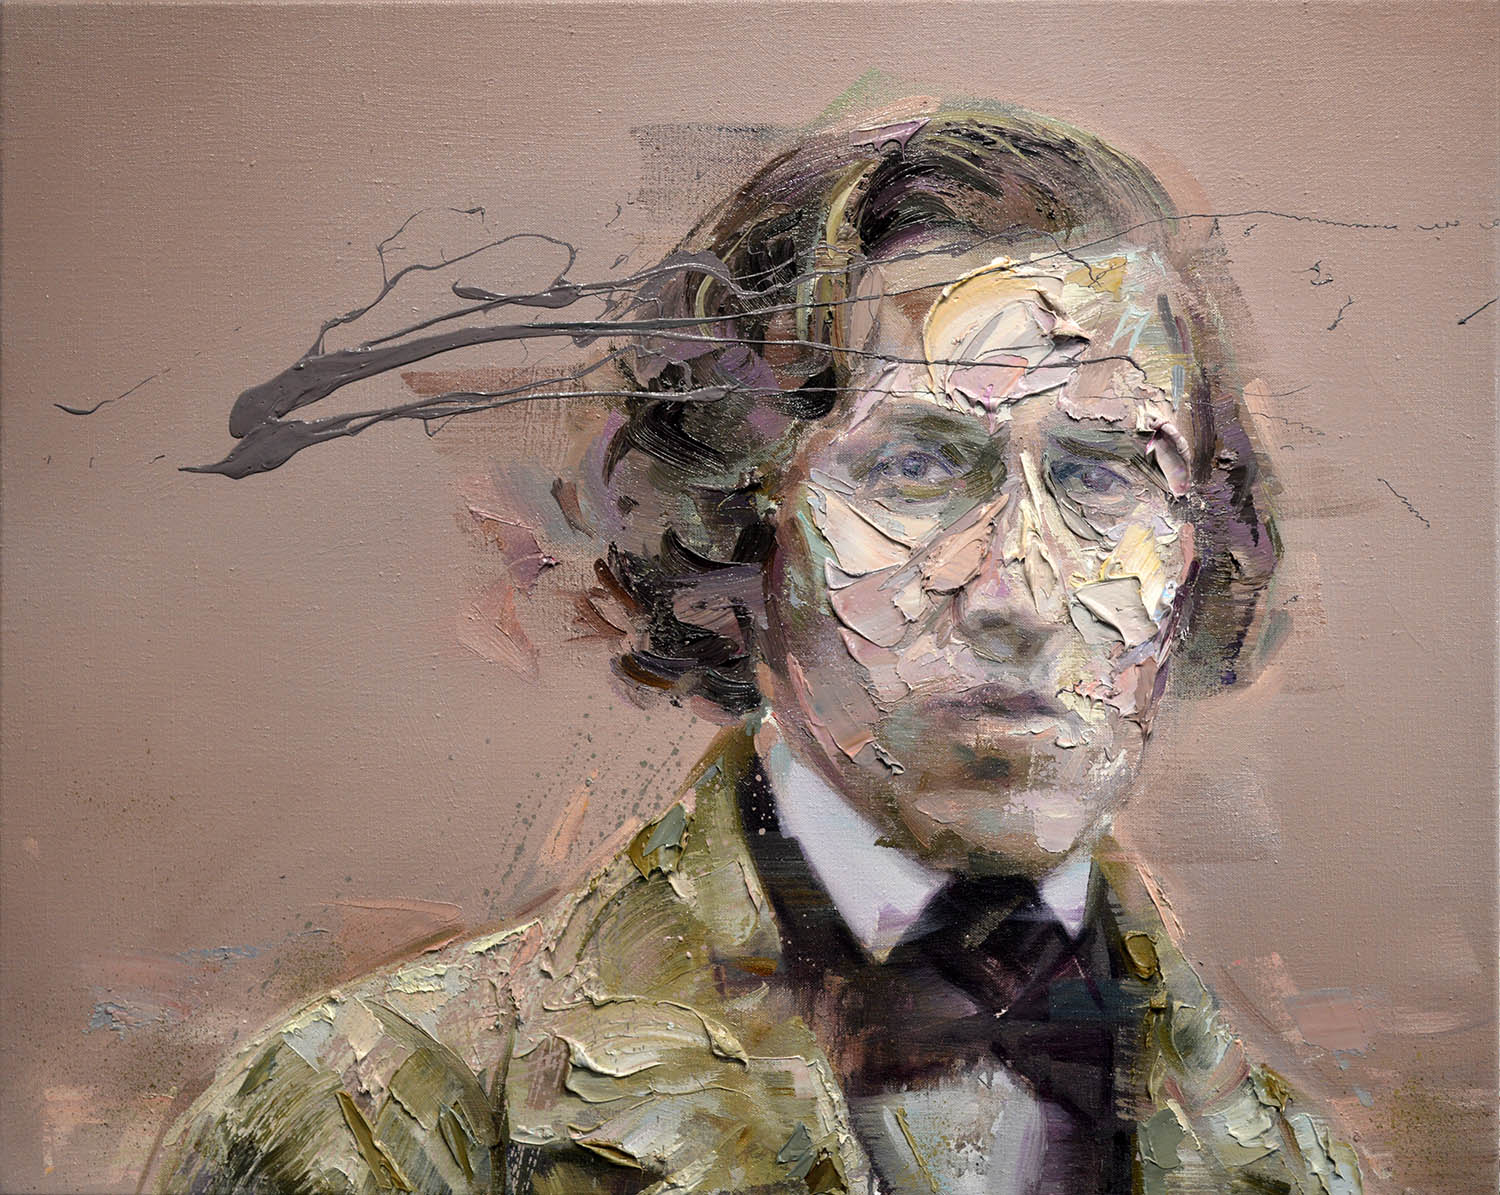 Painted portrait of Frédéric Chopin as aristocratic and delicate as his music.